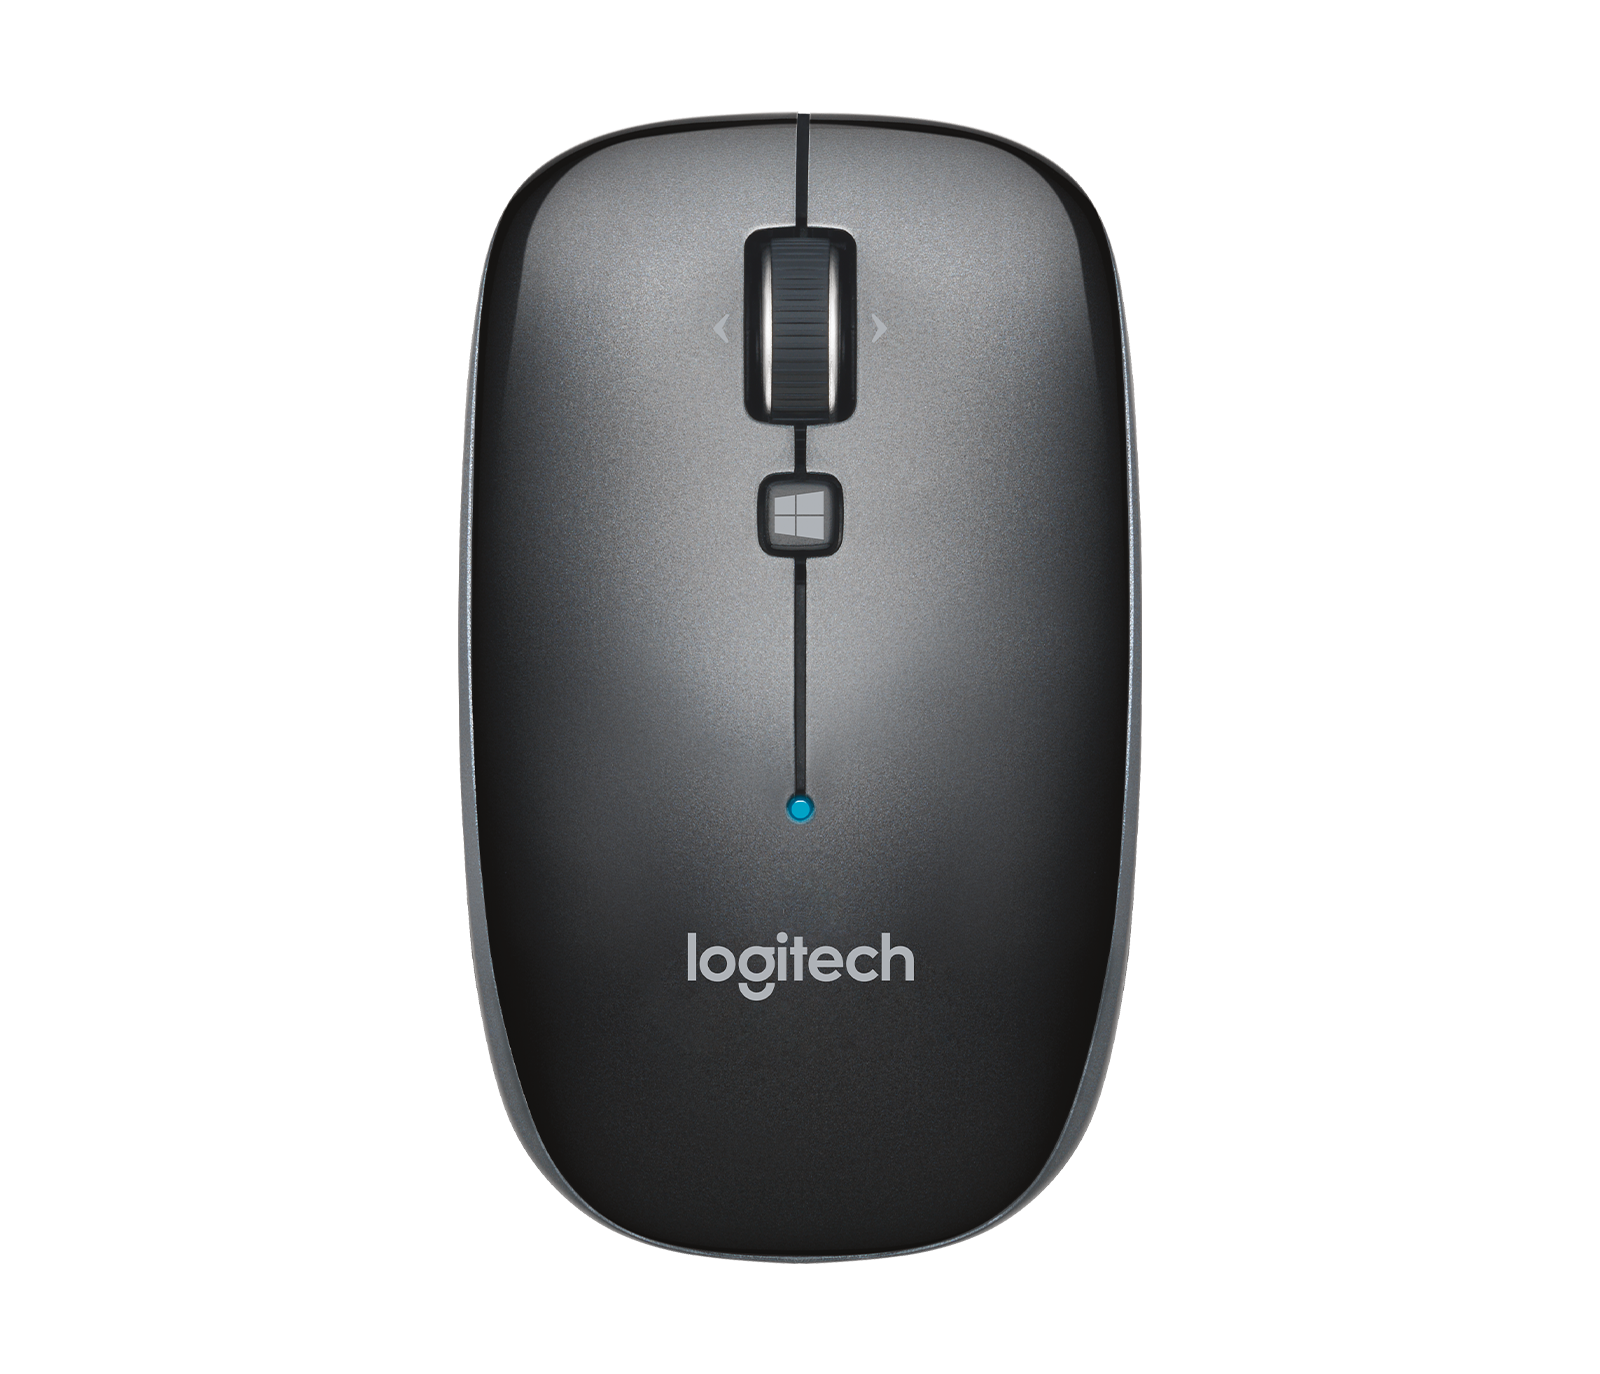 maak een foto Continu Identiteit Logitech M557 Bluetooth Wireless Mouse with Multi OS Support